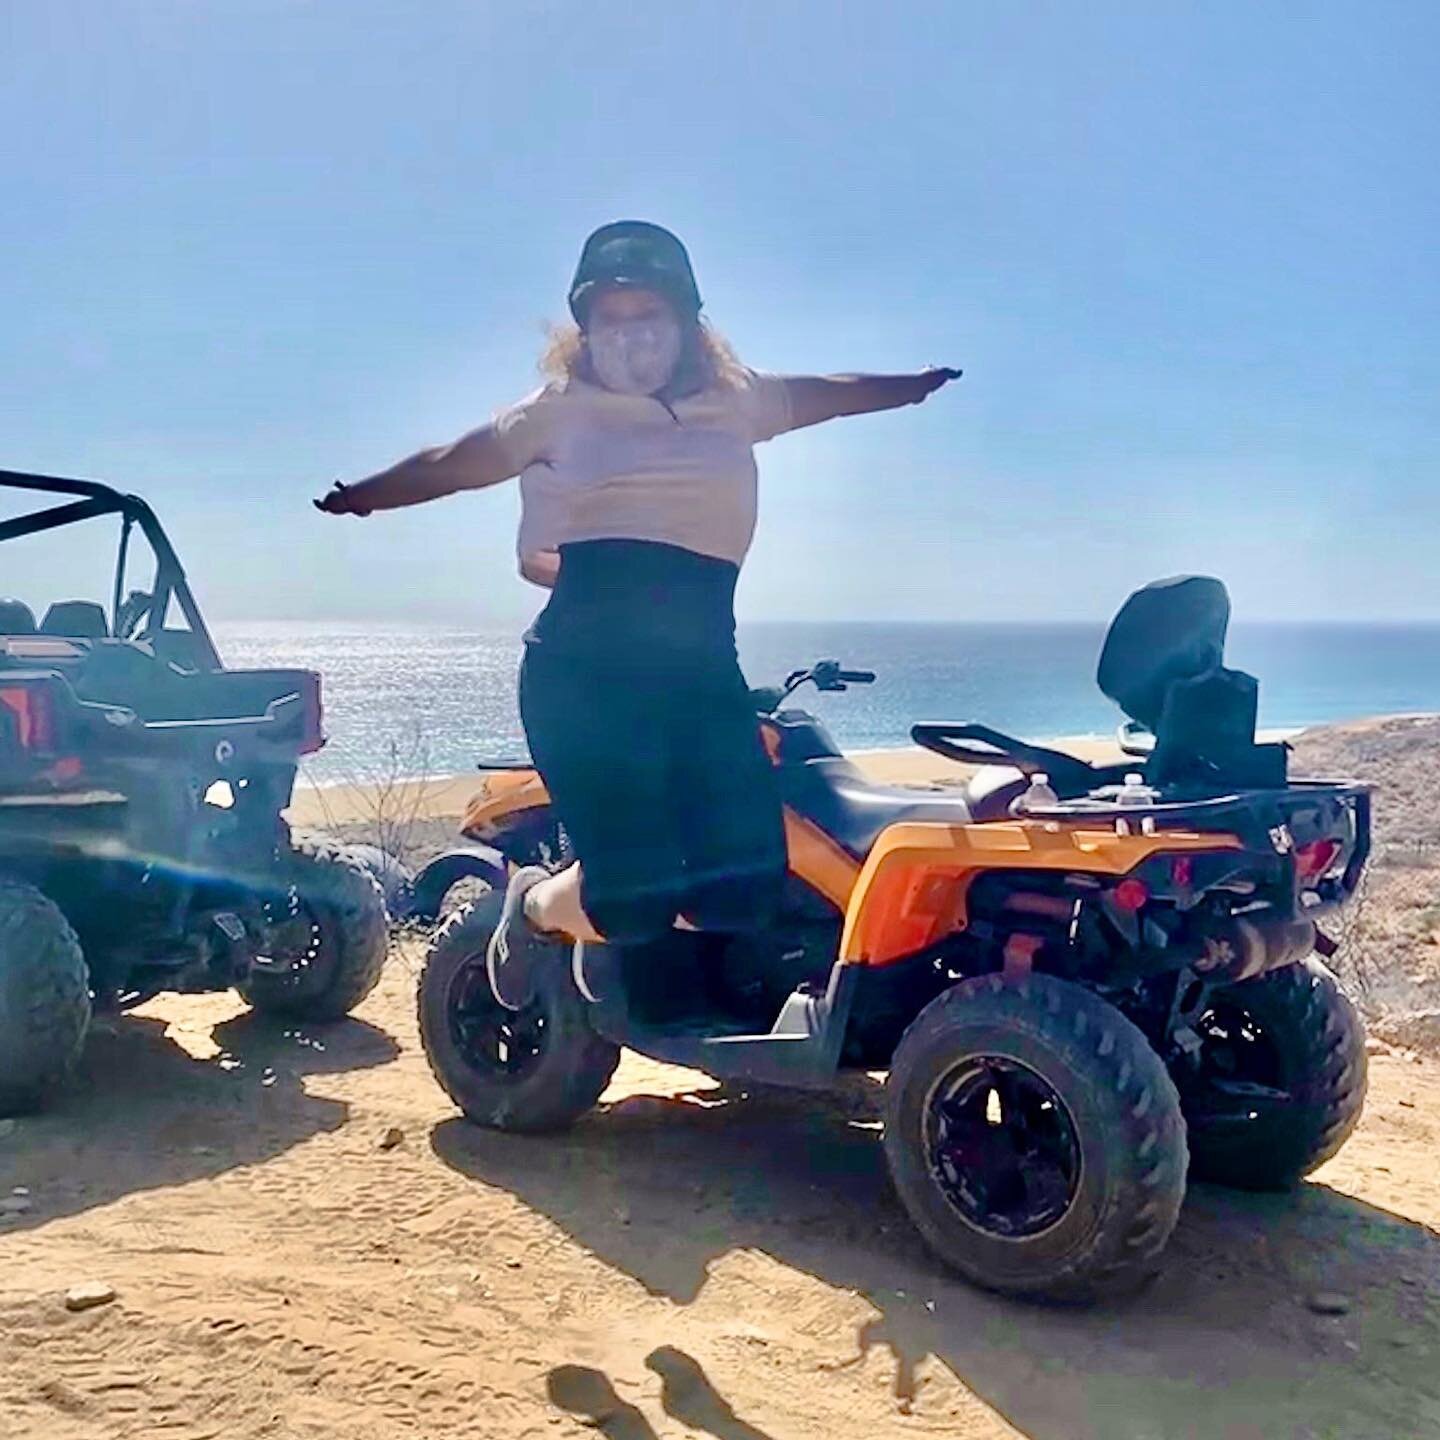 Last week I went ATV&rsquo;ing in Cabo, ☀️ and got to ride miles on UNSPOILED UNTOUCHED beach with the Pacific Ocean as my left lane 🛵.......it was thrilling, calming, and I found out I&rsquo;m an excellent off road driver 😉 It&rsquo;s an experienc